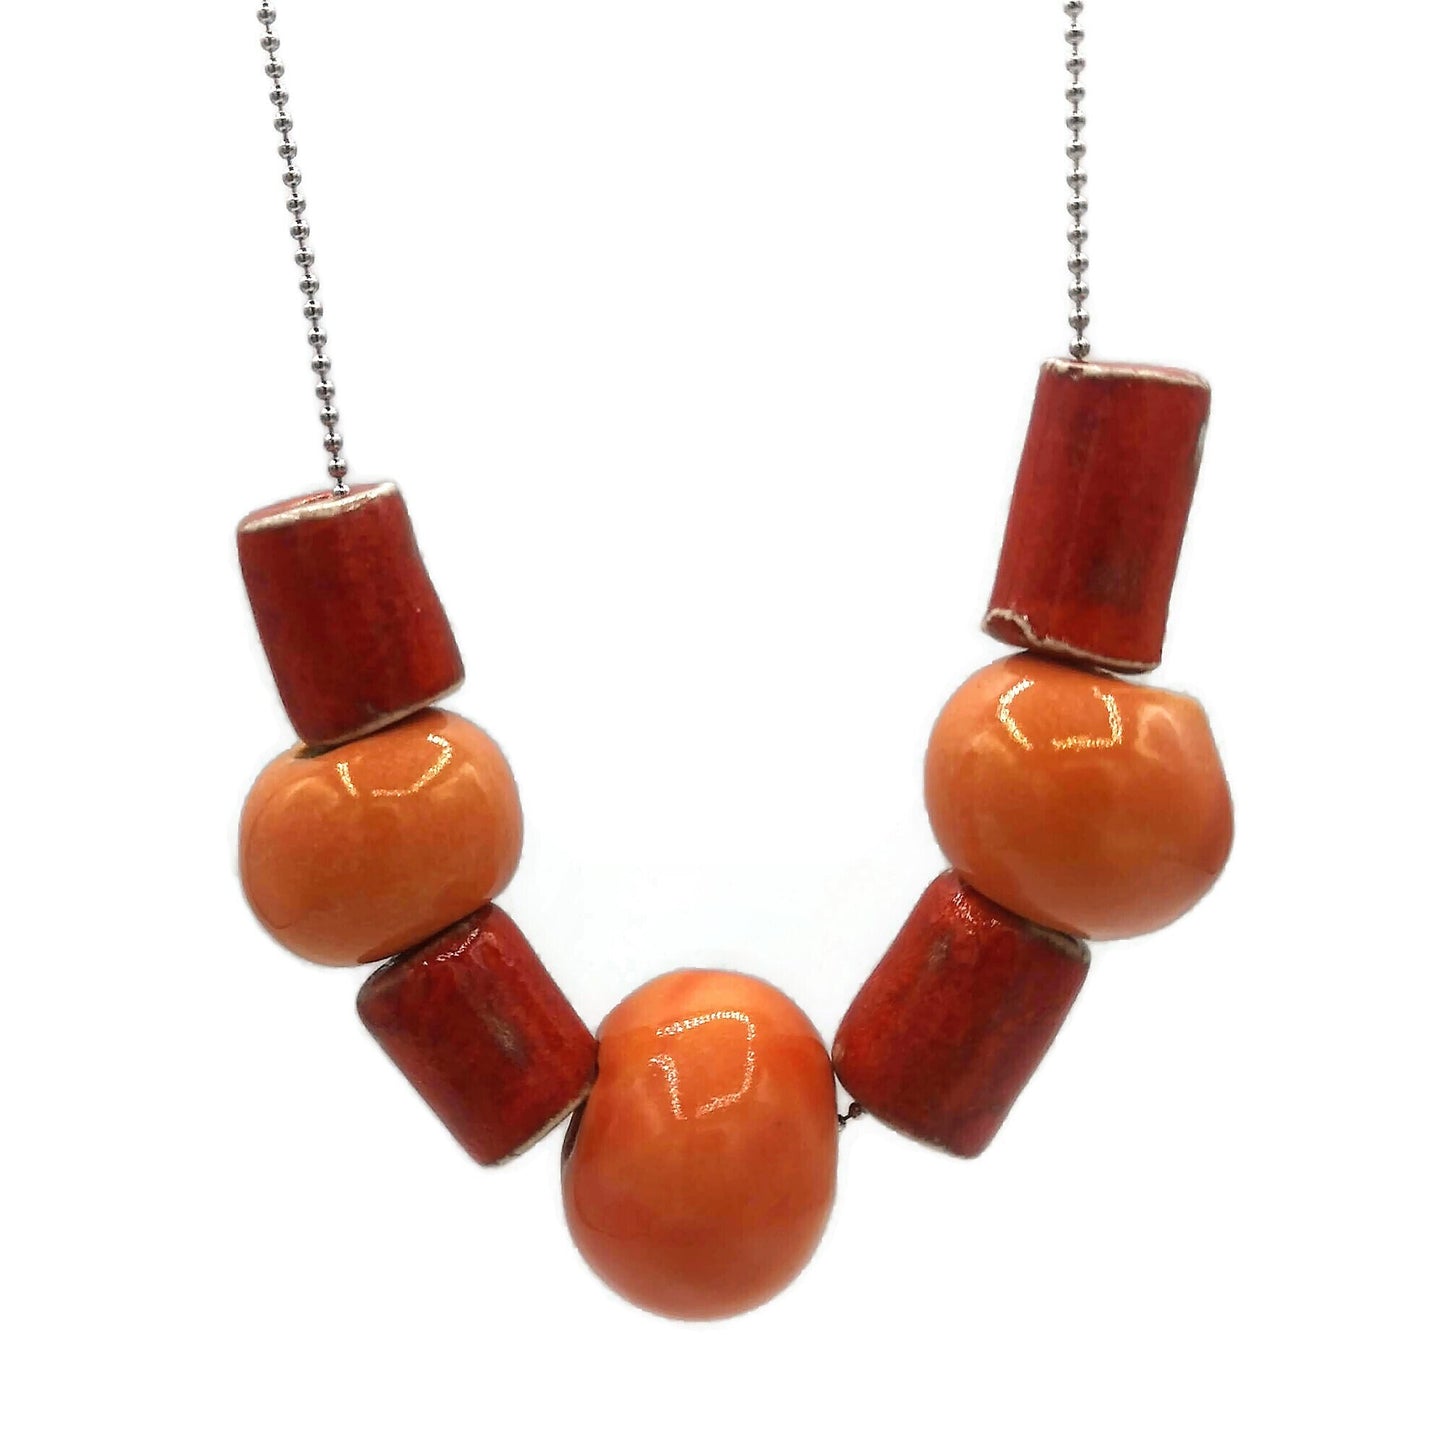 Large Red And Orange Beaded Statement Necklace For Women, Everyday Aesthetic Necklace, Best Gifts For Her, Handmade Ceramic Jewelry - Ceramica Ana Rafael